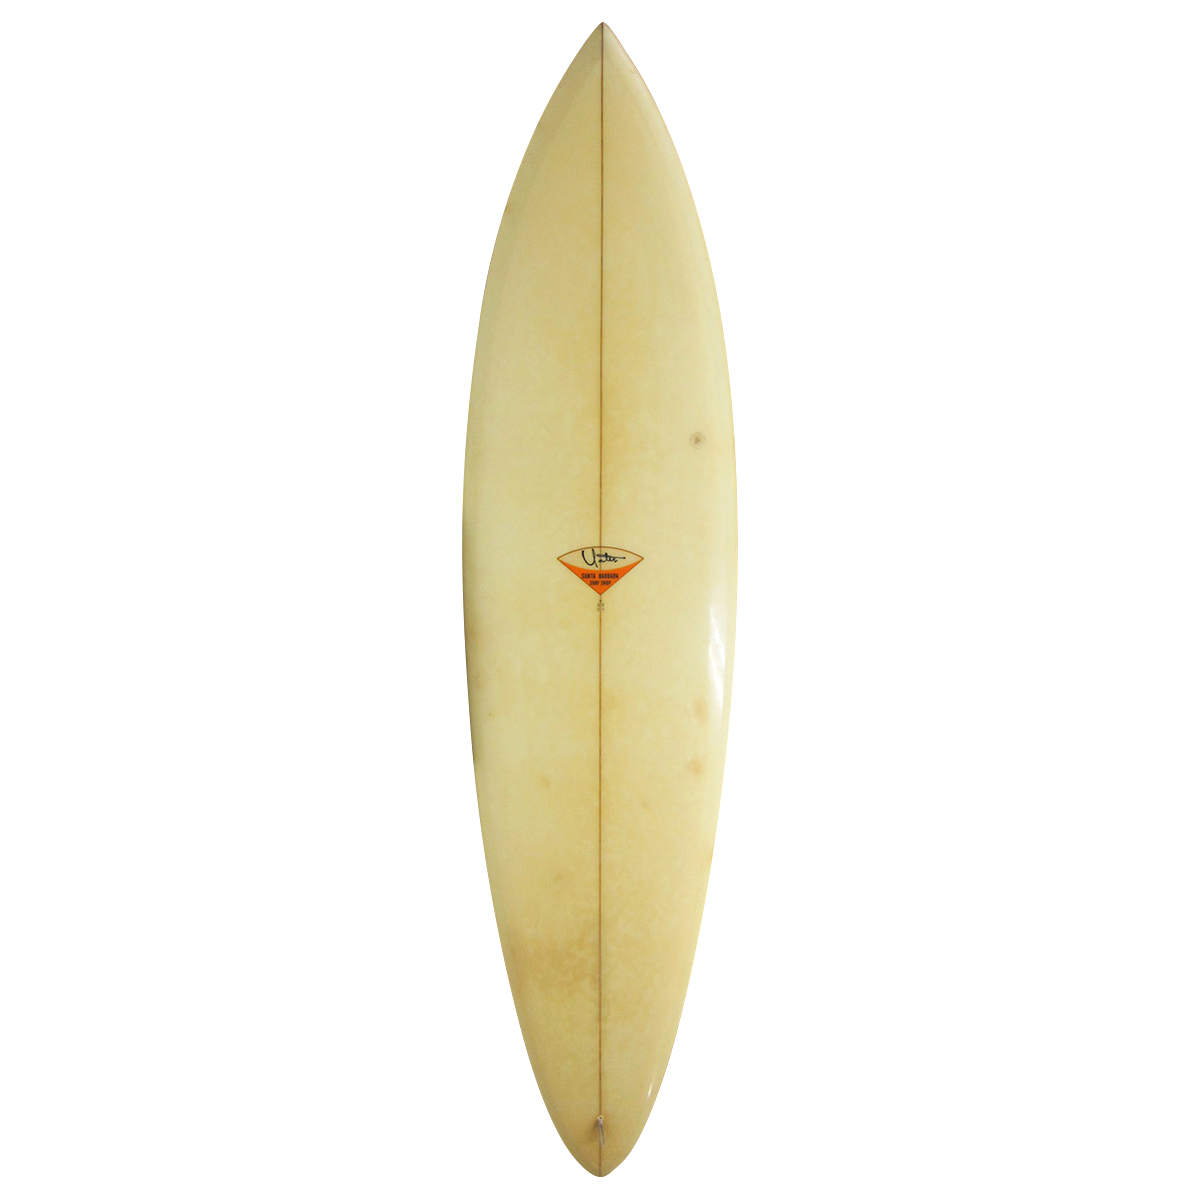  / Yater surfboards / RATE 70`s Single Shaped by RENNY  YATER